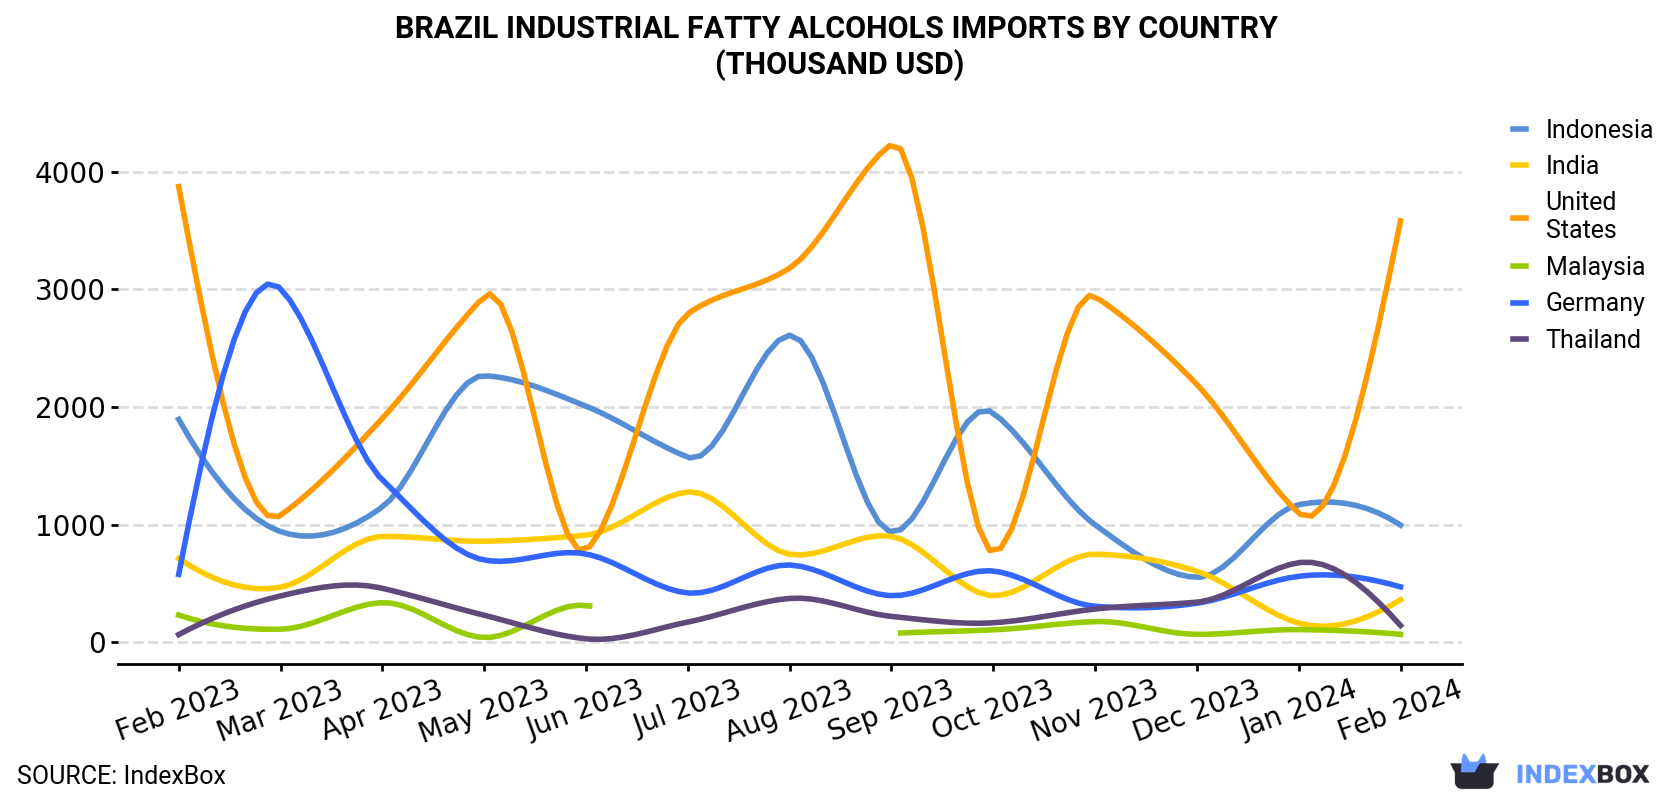 Brazil Industrial Fatty Alcohols Imports By Country (Thousand USD)